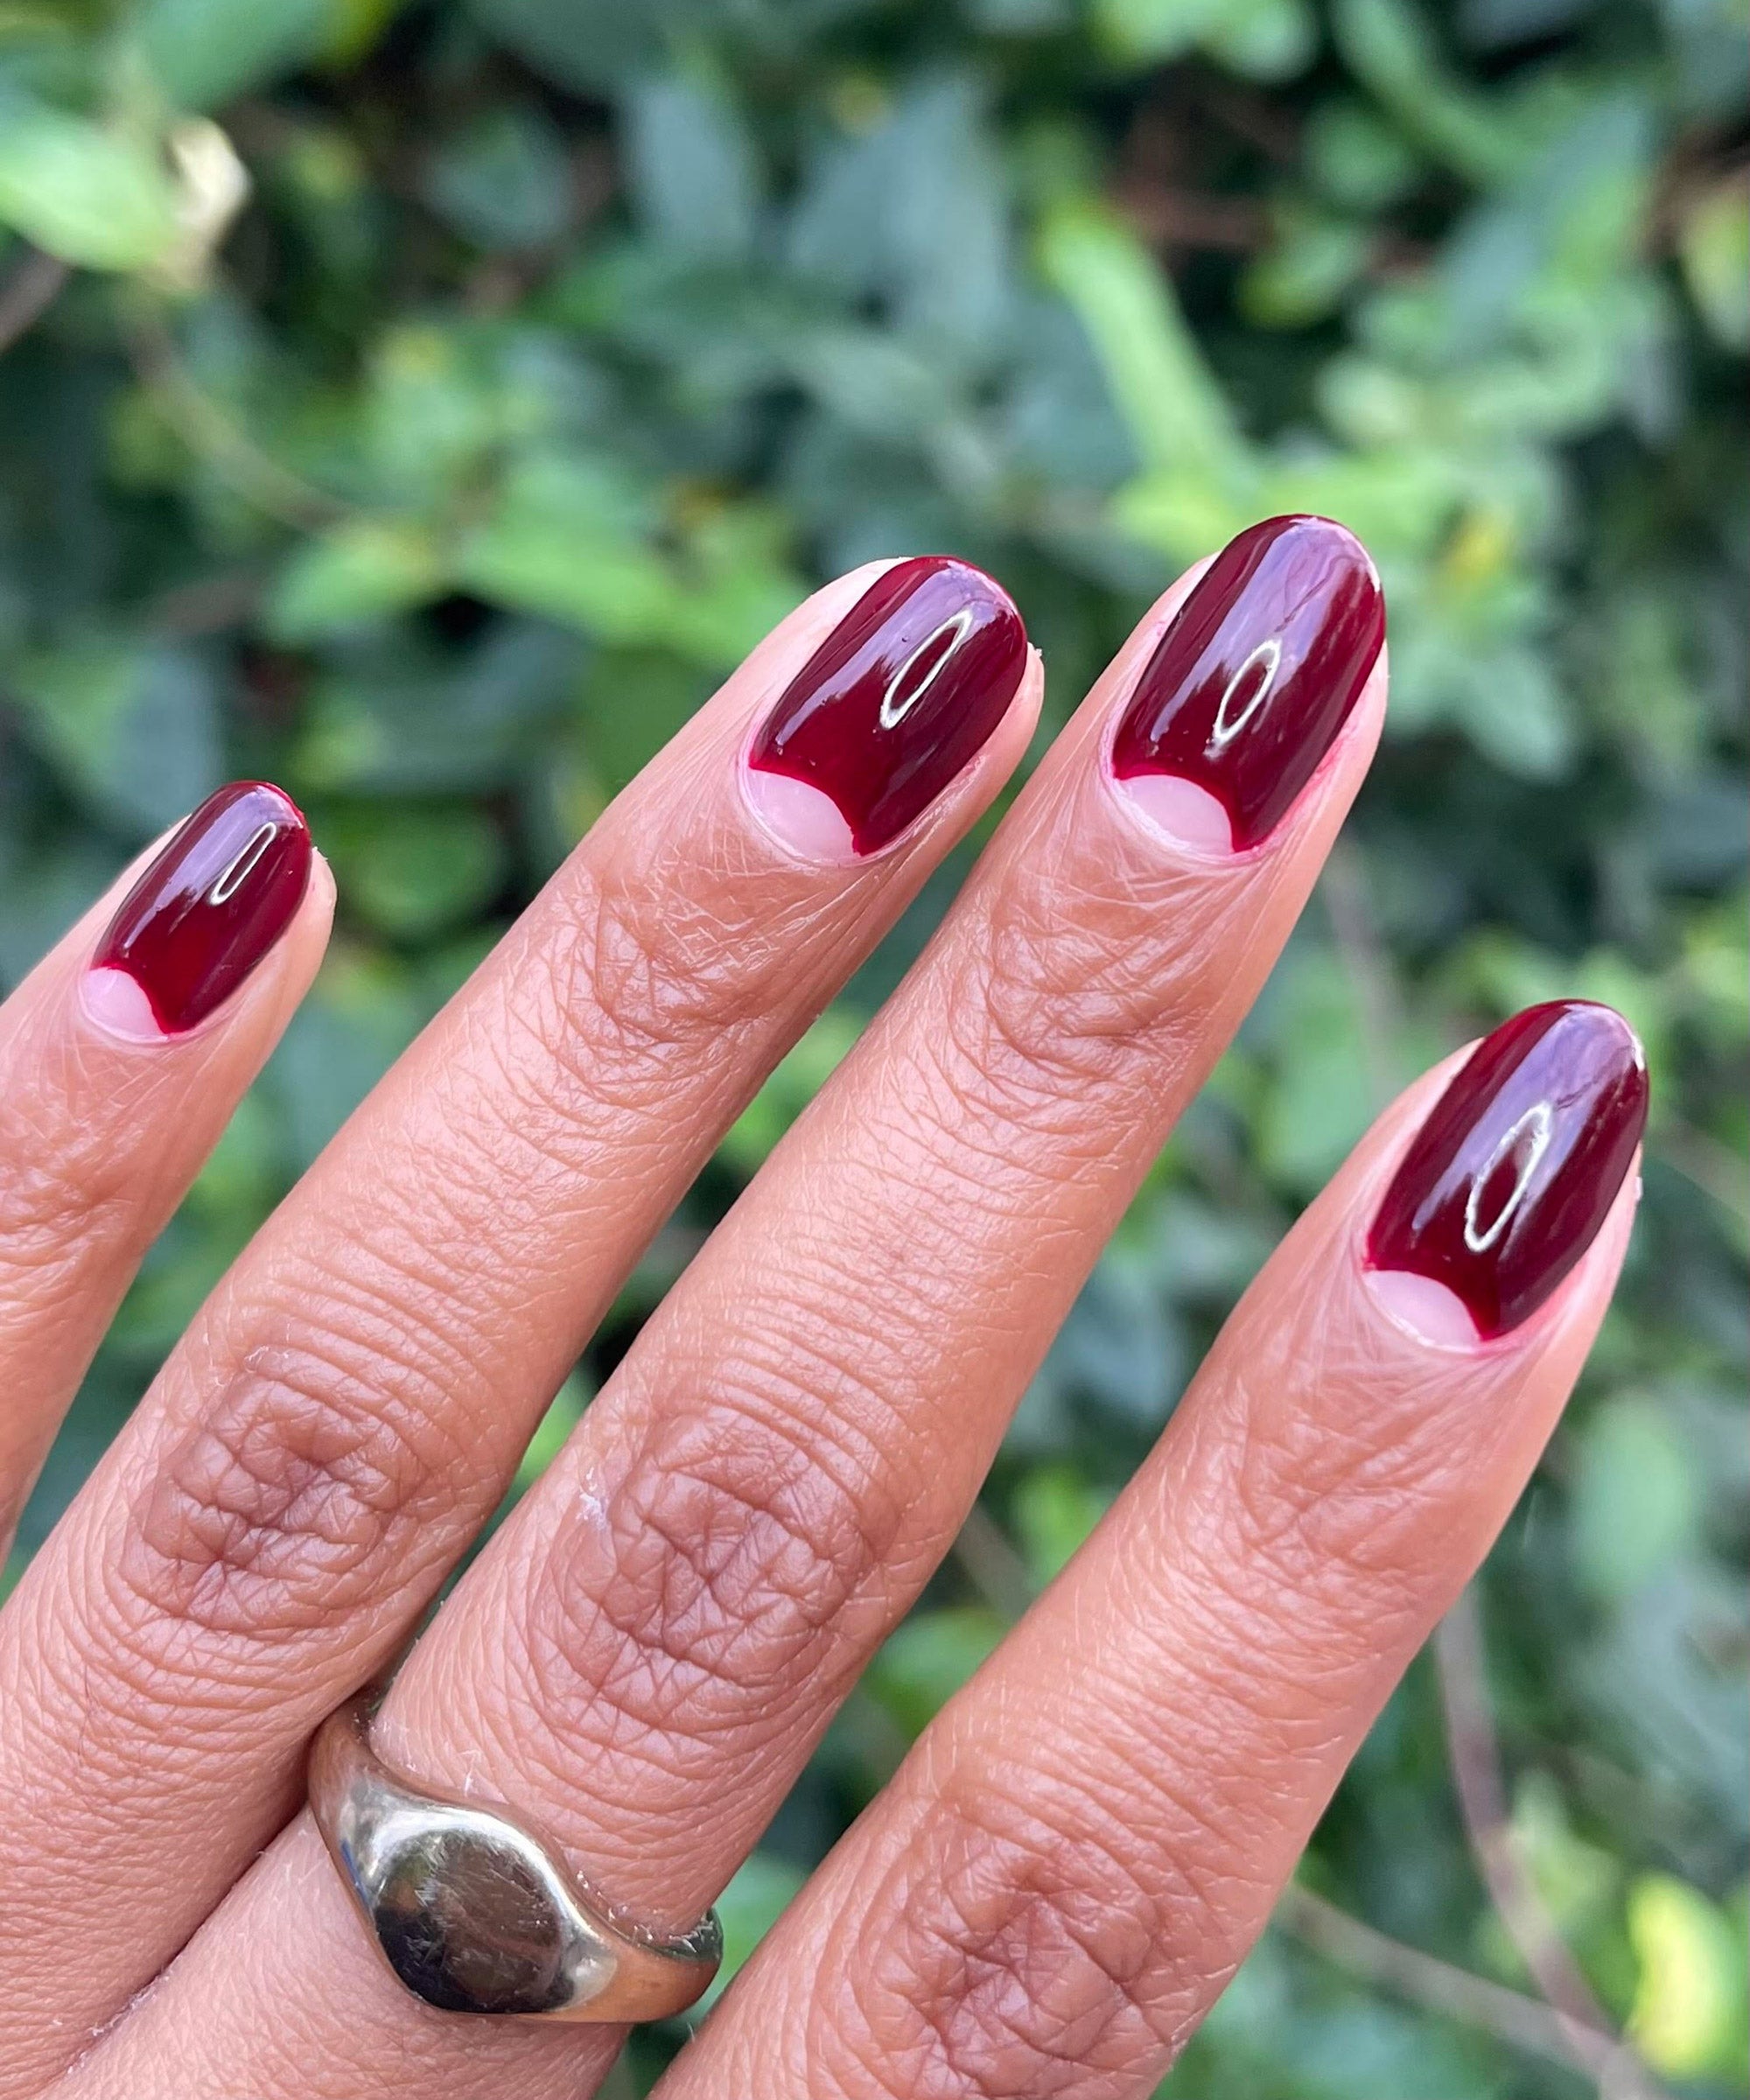 Nail art to inspire you for Valentine's Day — British Asian Women's Magazine